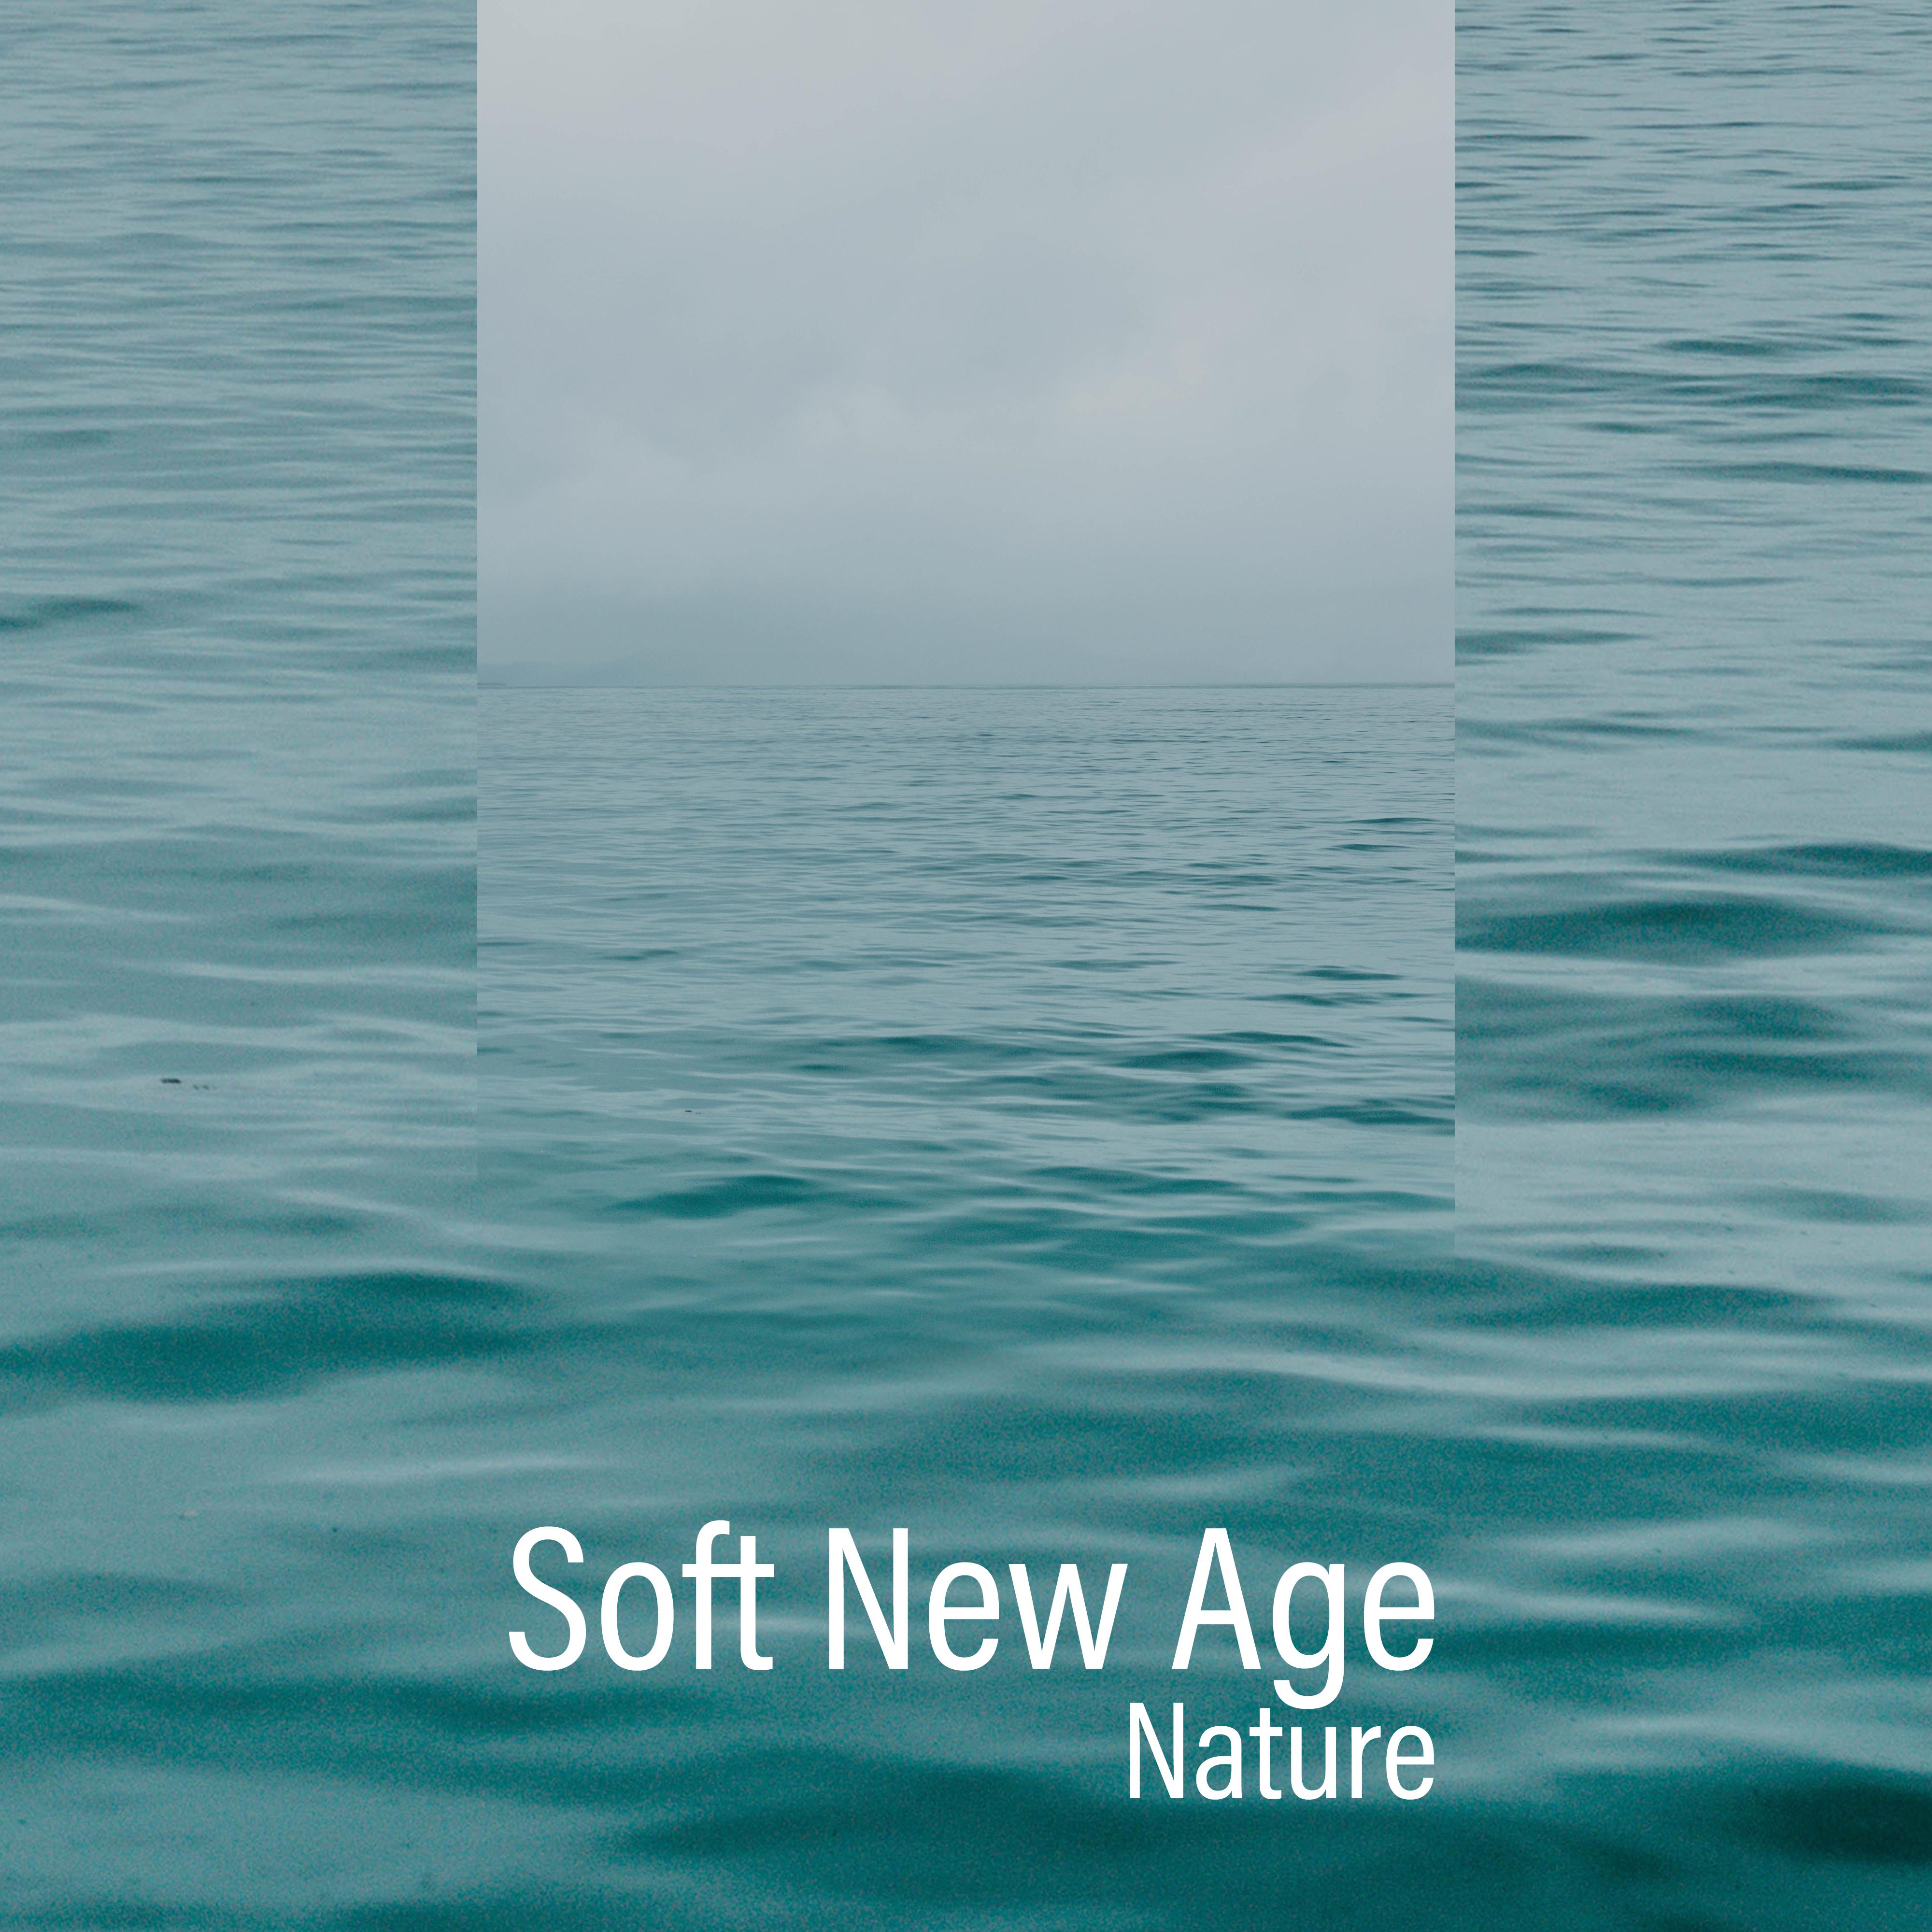 Soft New Age: Nature